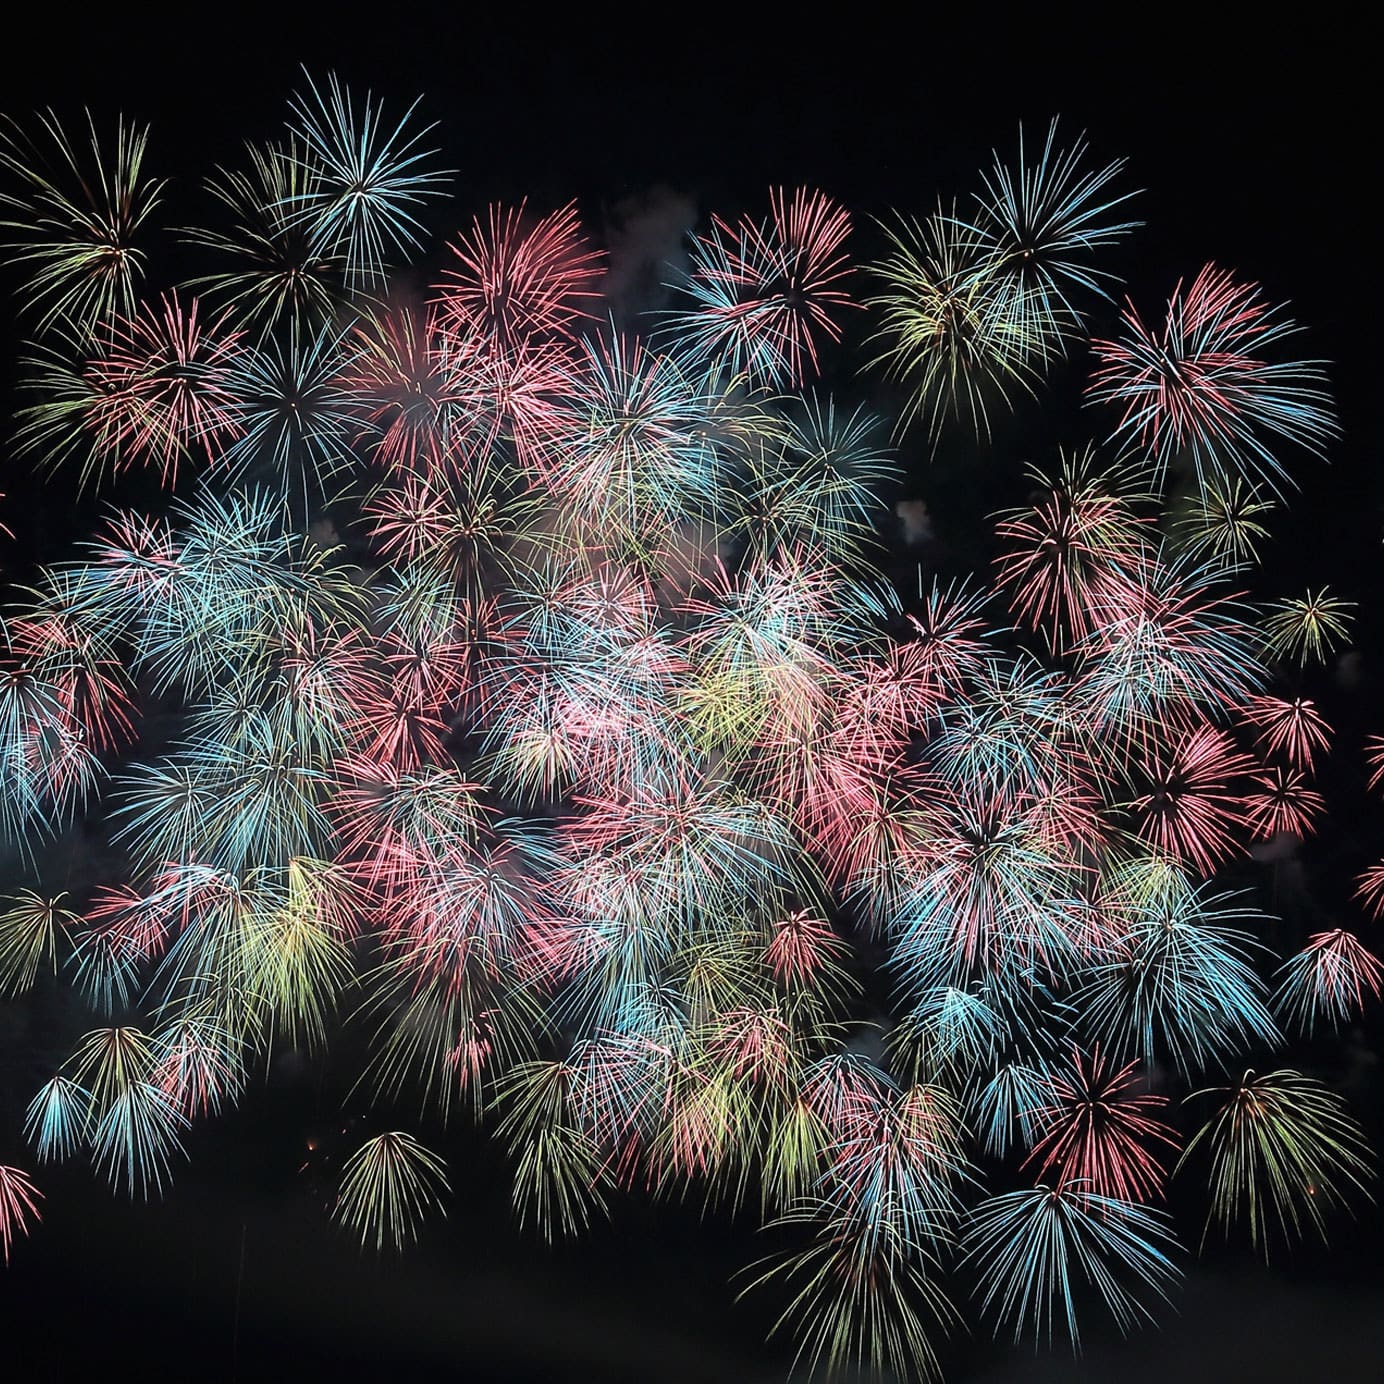 Fireworks is the signal of Lunar New Year